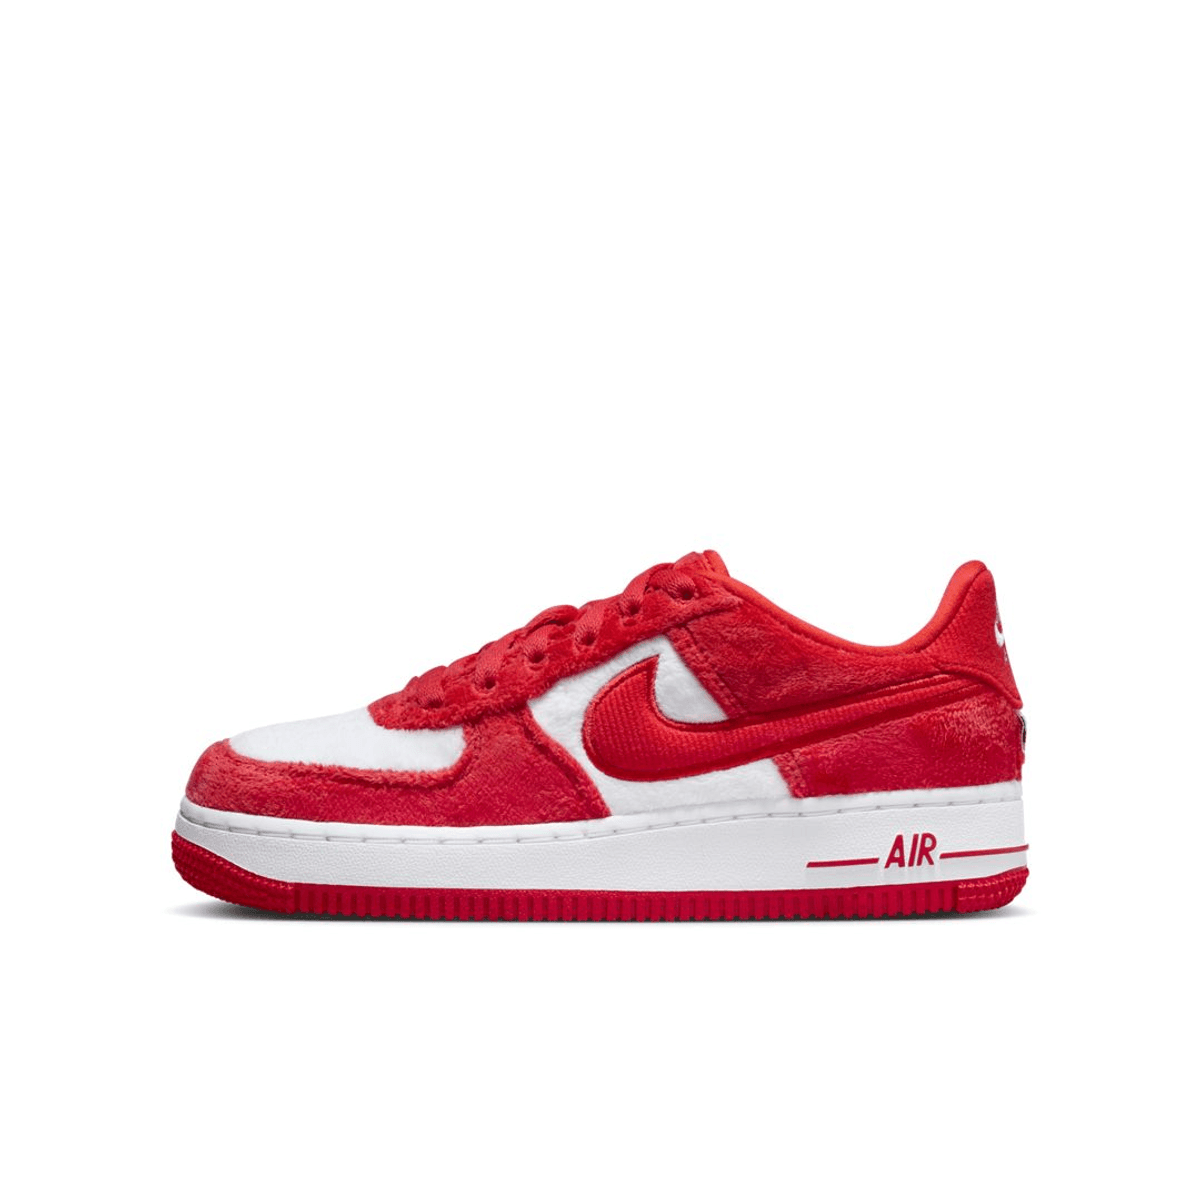 Official Images Of The Nike Air Force 1 Low GS “Valentine’s Day”